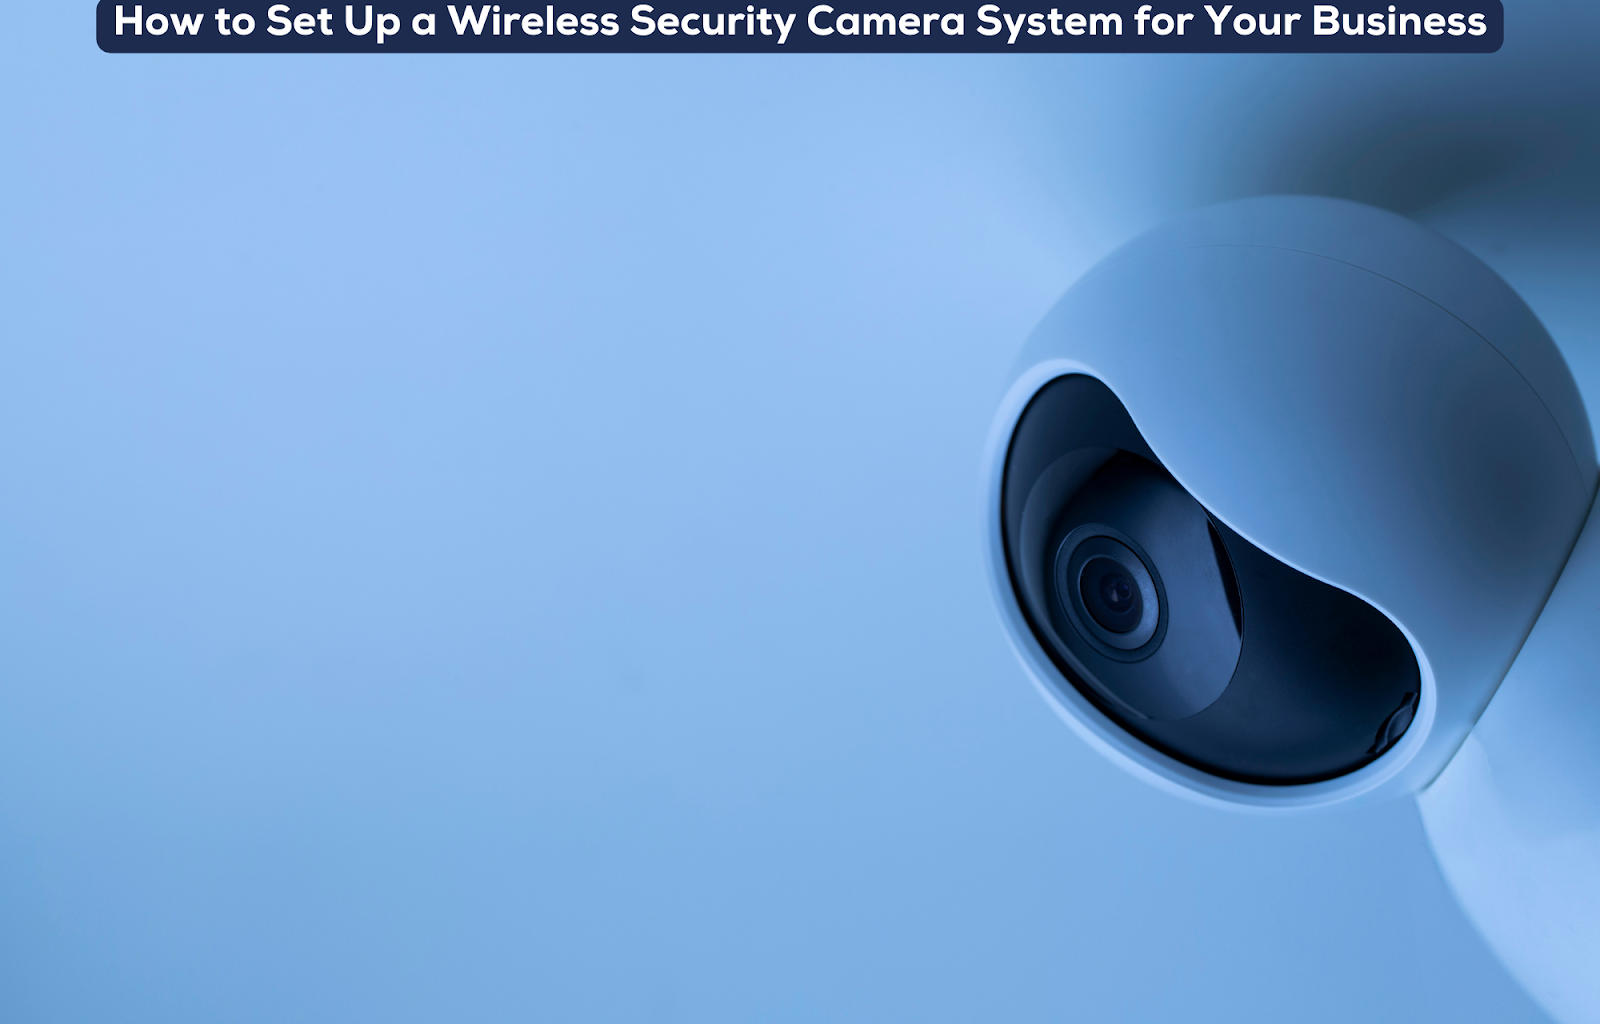 How to Set Up a Wireless Security Camera System for Your Business